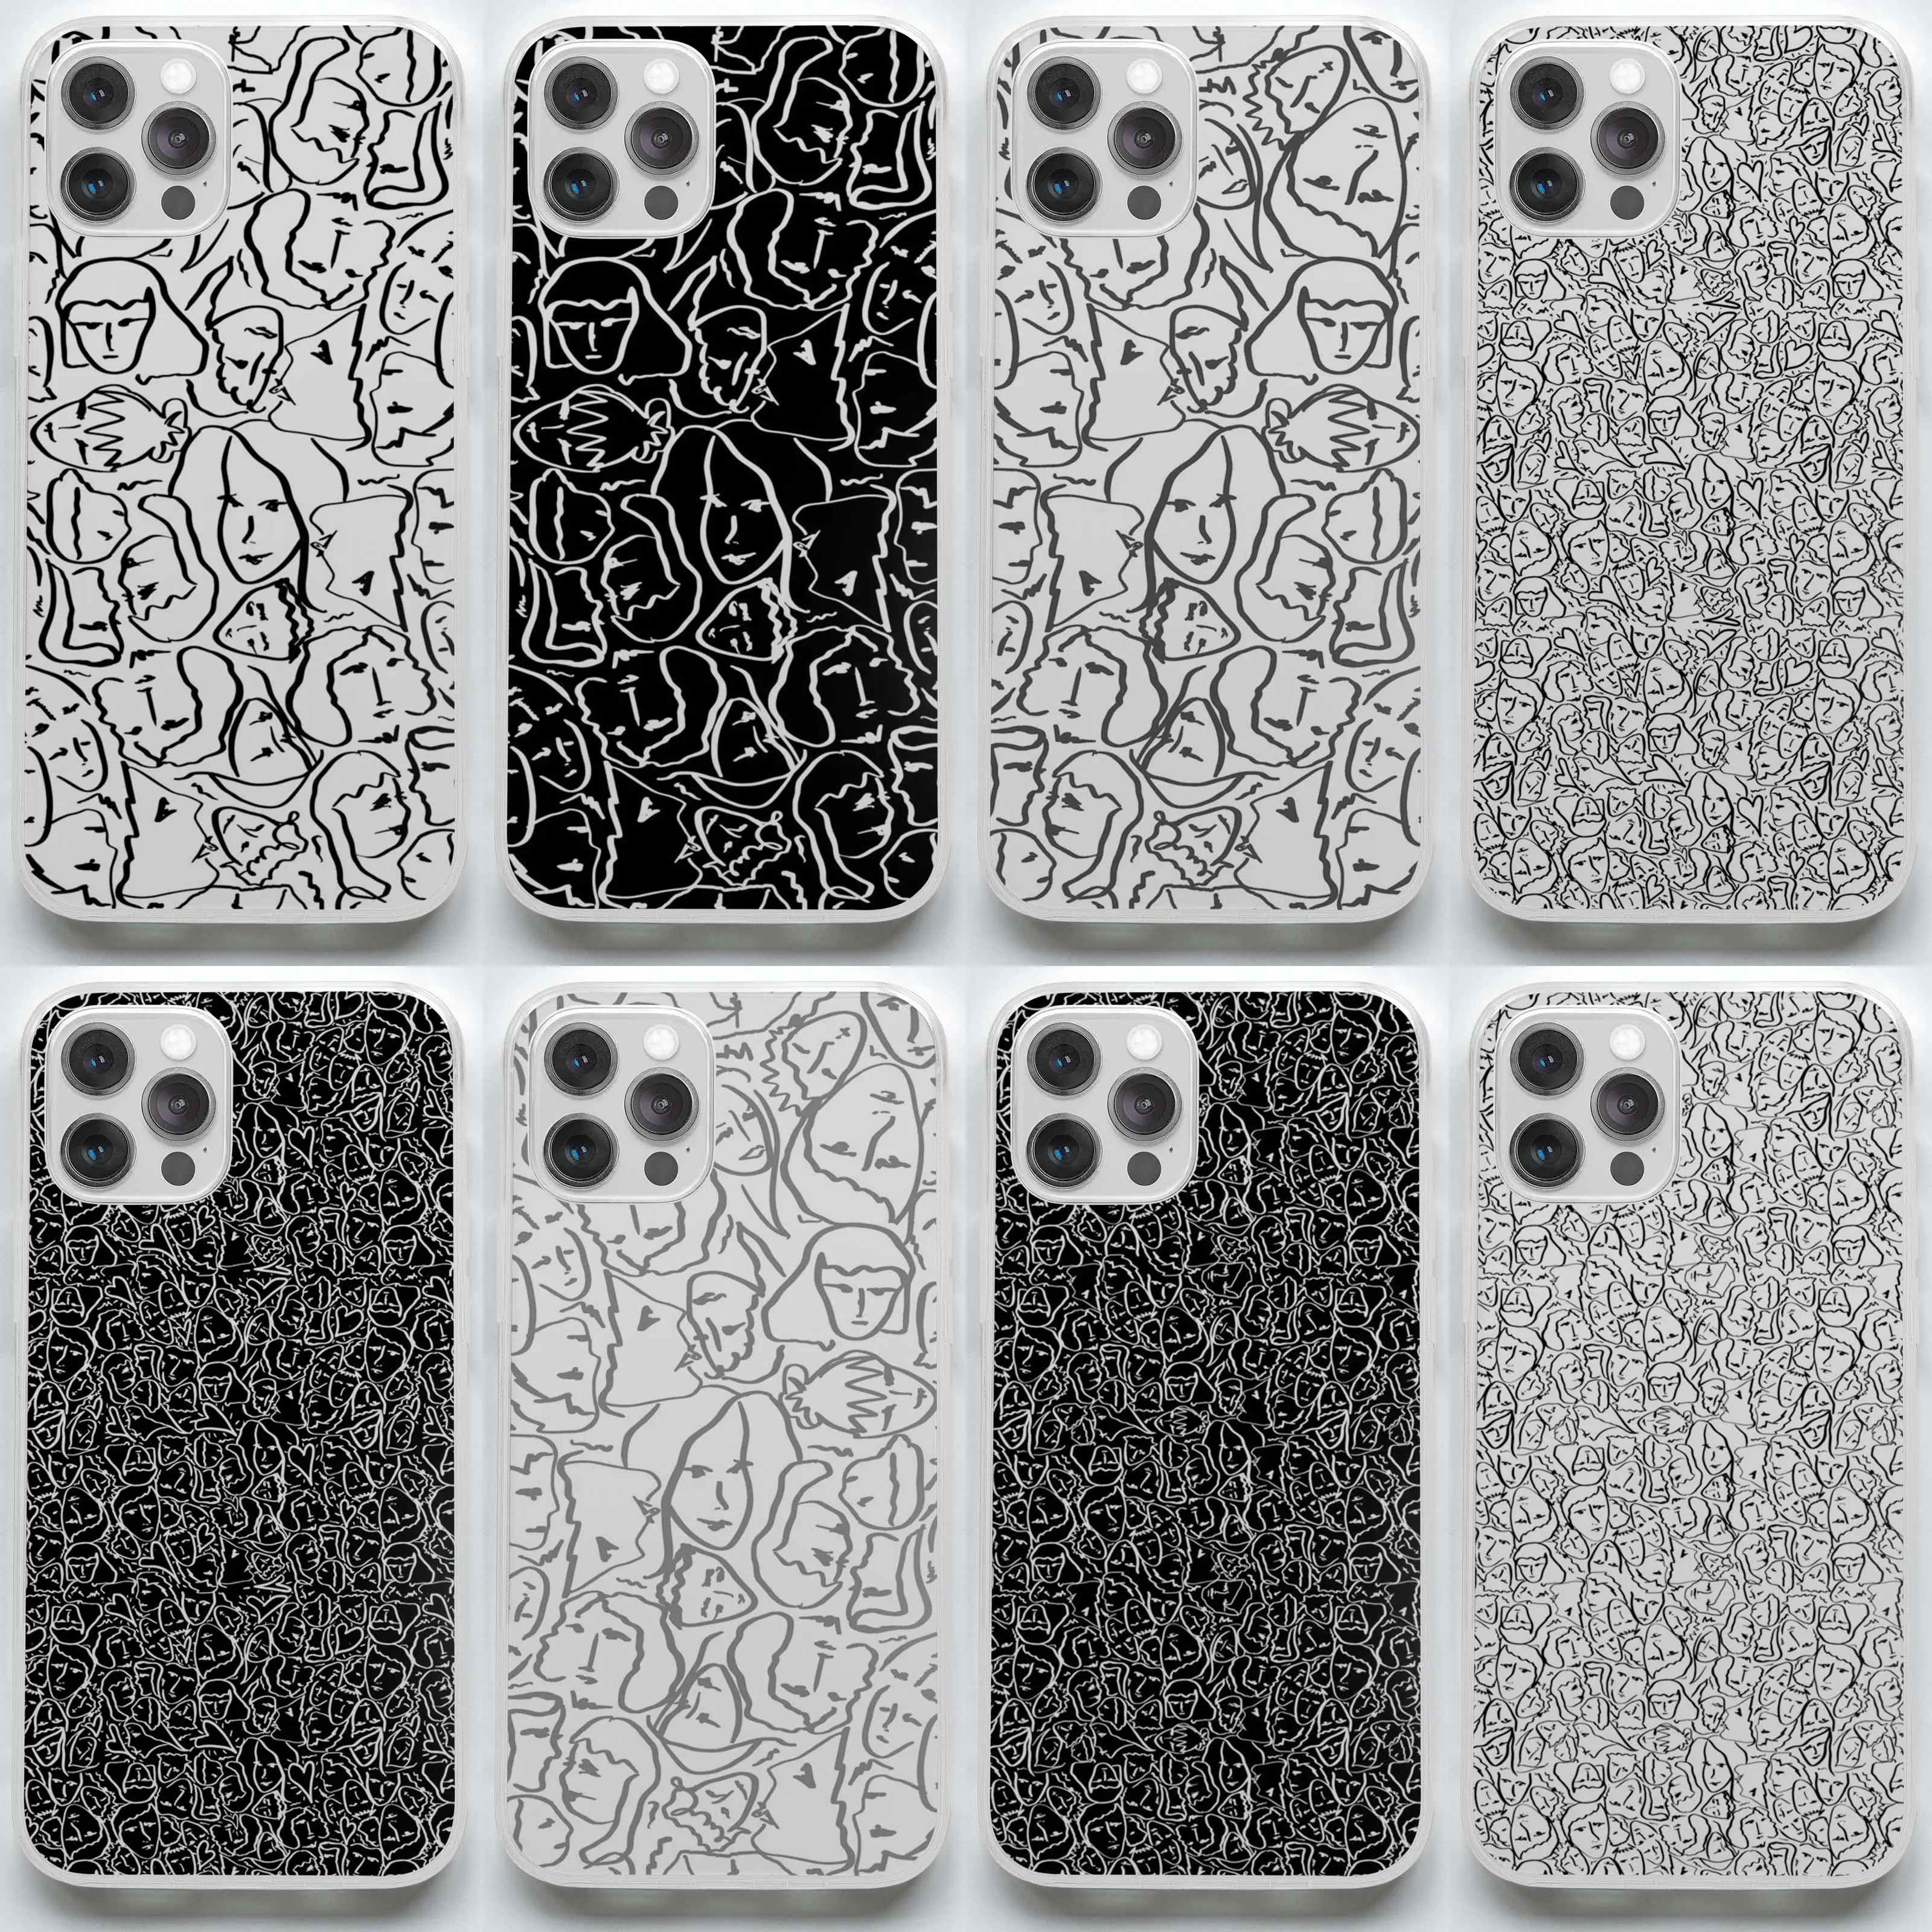 Call Me Name Elios Shirt Faces In Black Outlines On White Cmbyn Phone Case for iPhone 7 8 Plus 11 12 13 Pro Max Mini X XS XR Max